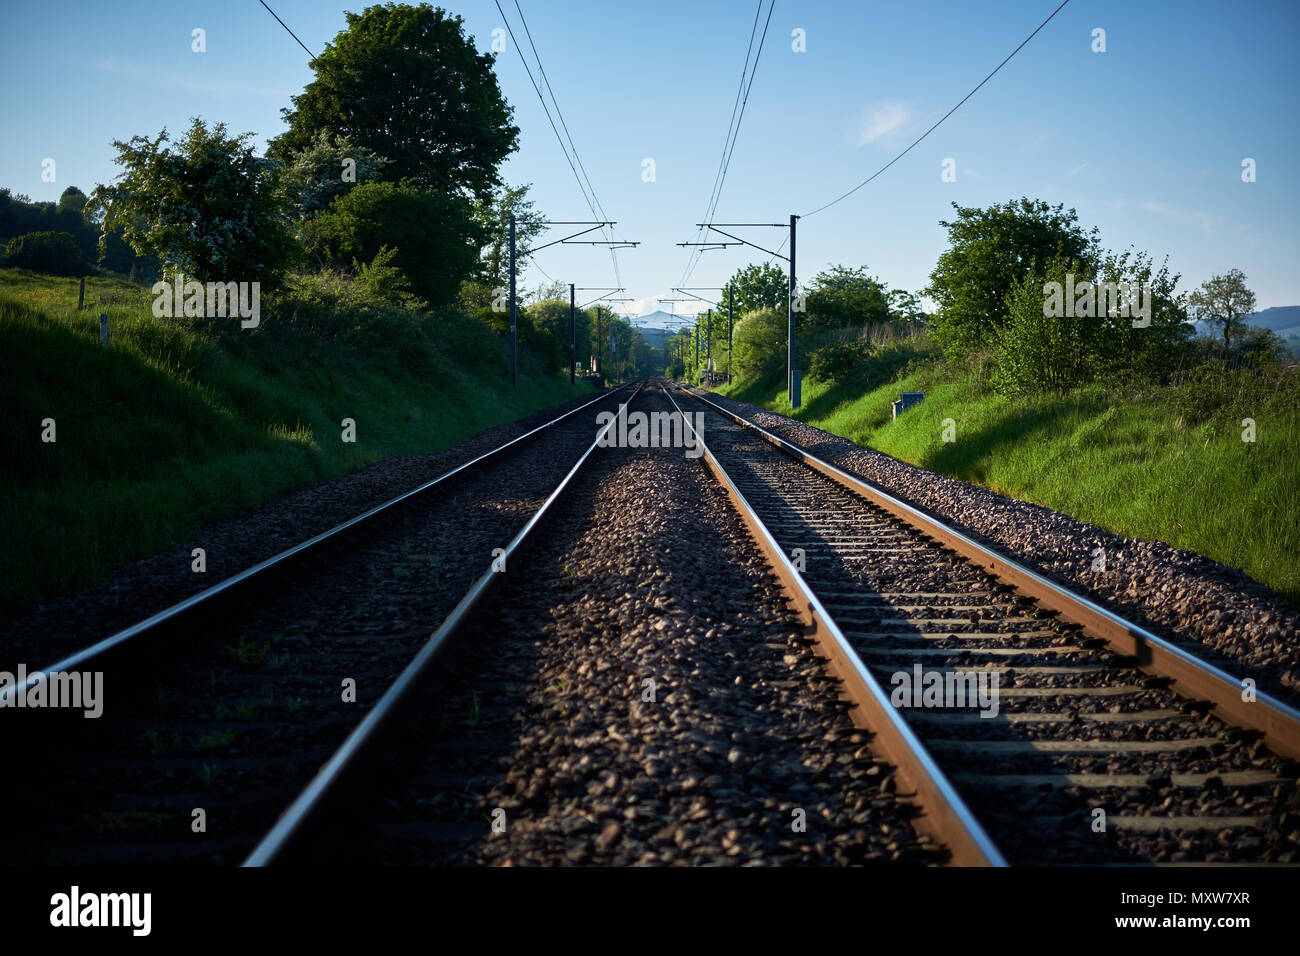 Two train tracks merge in the distance on a clear, sunny day on an electrified line Stock Photo